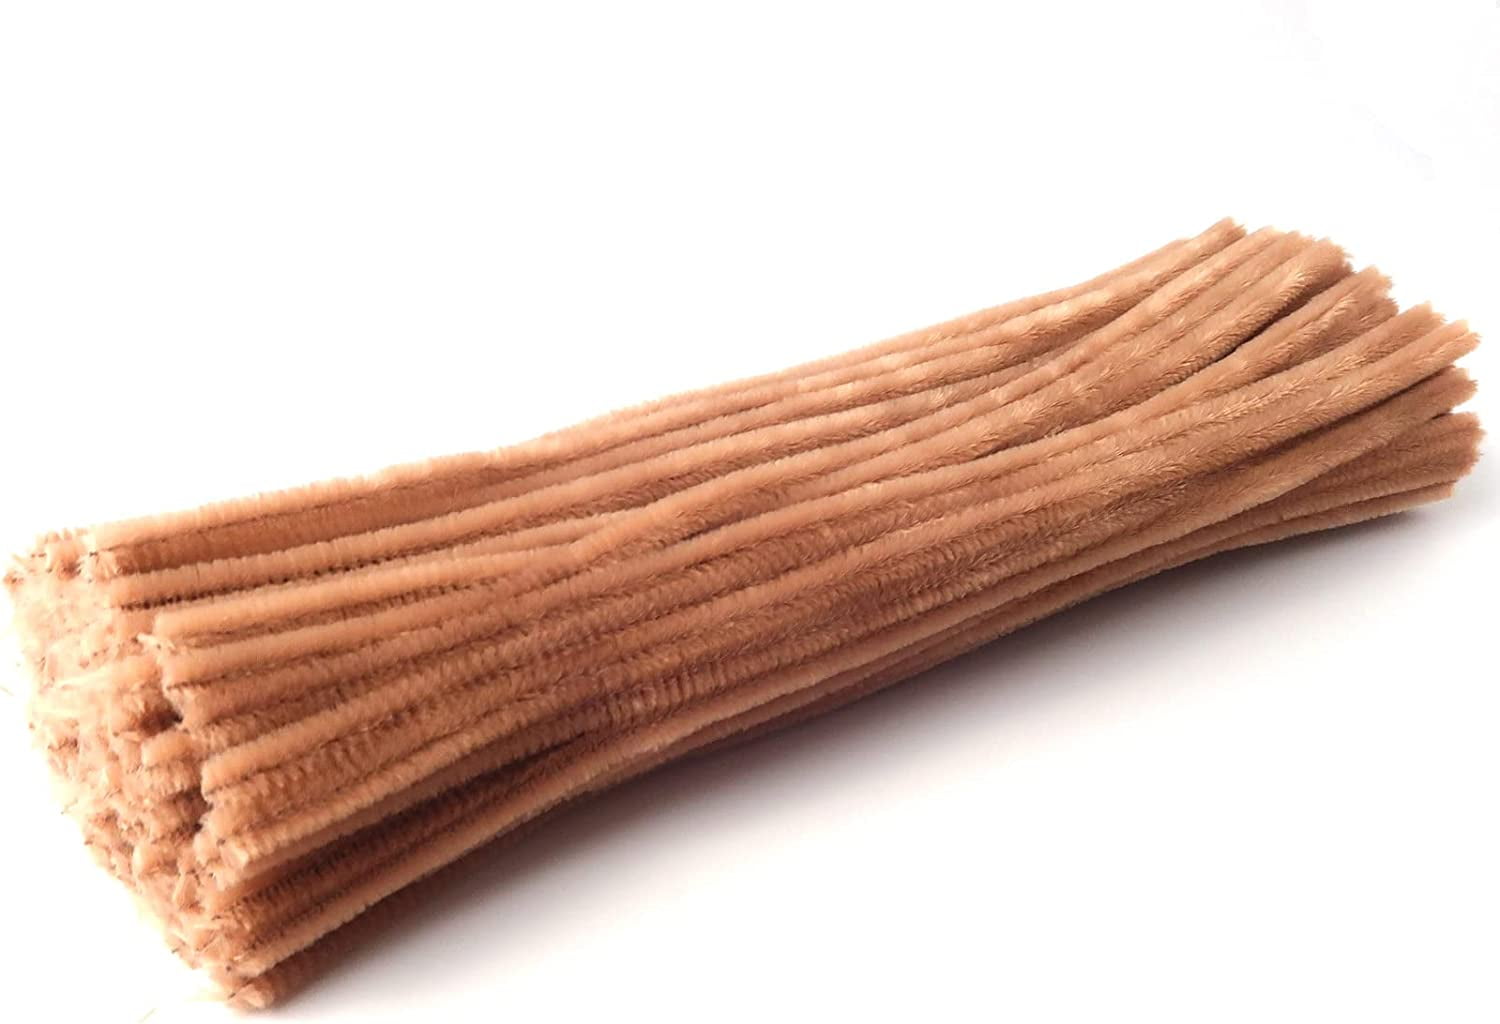 Colorations Pipe Cleaners, Brown - Pack of 100